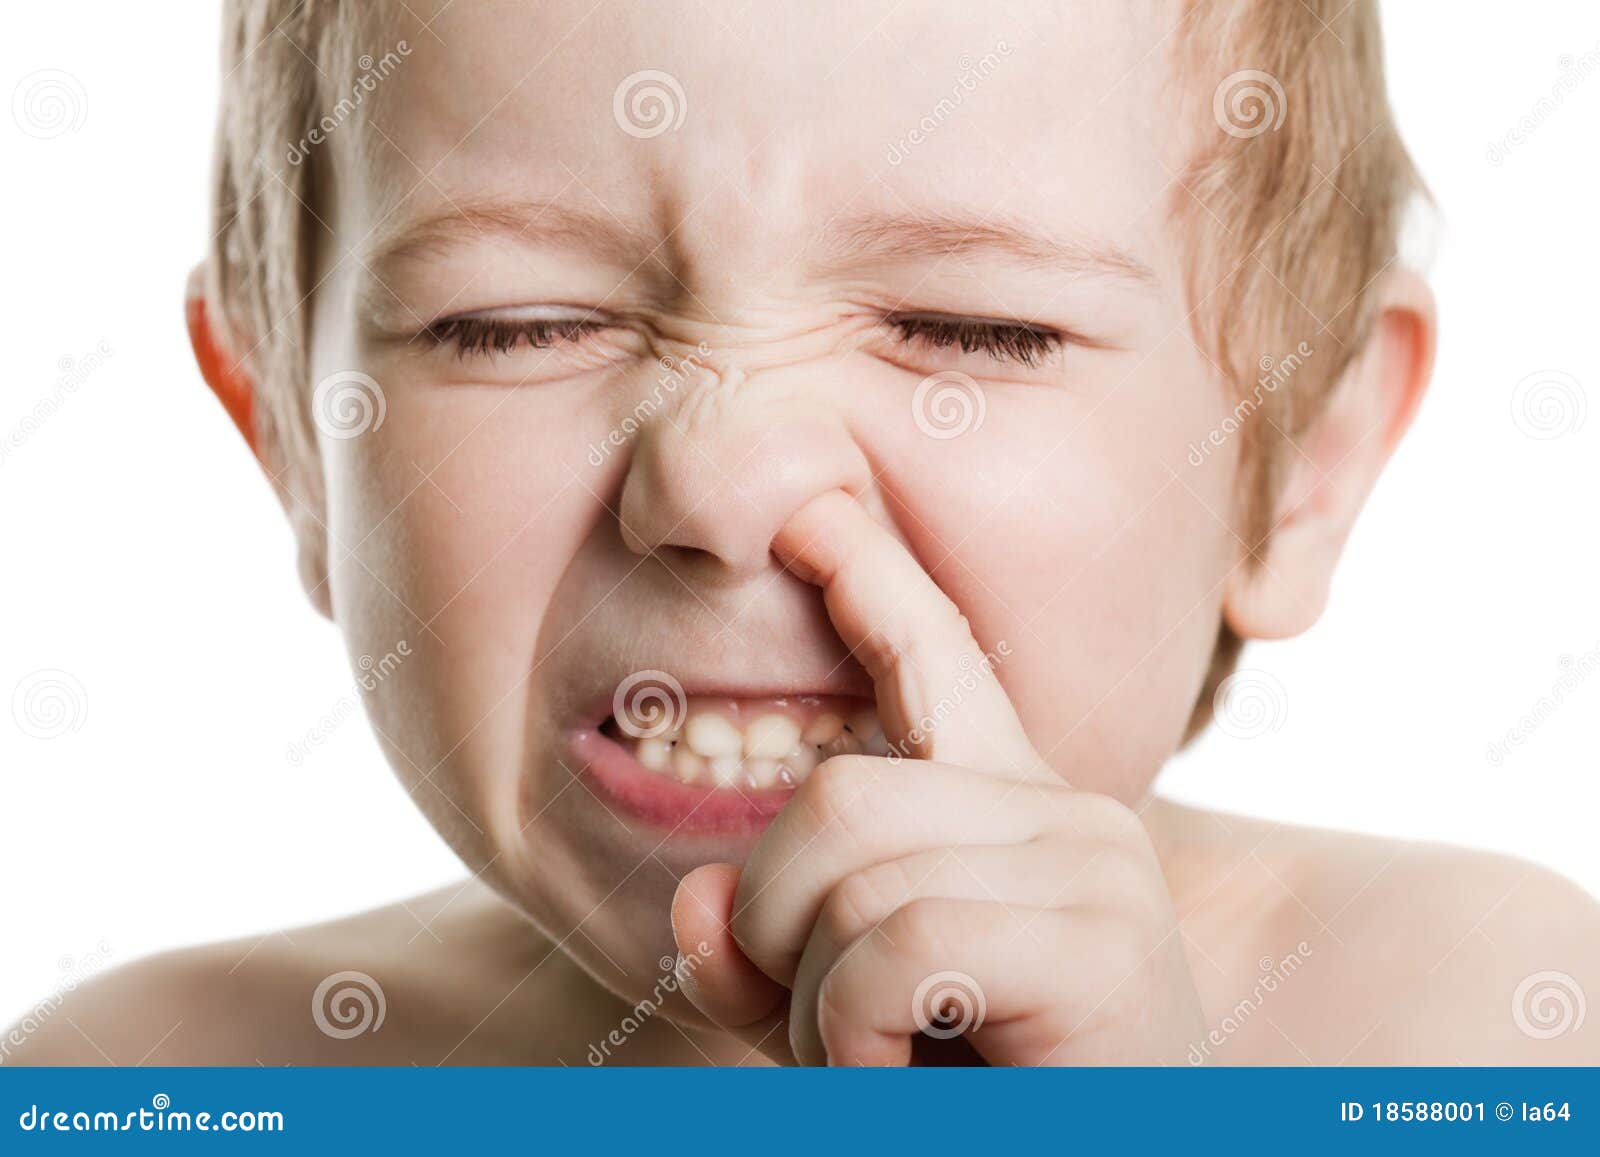 Image result for stock image picking nose